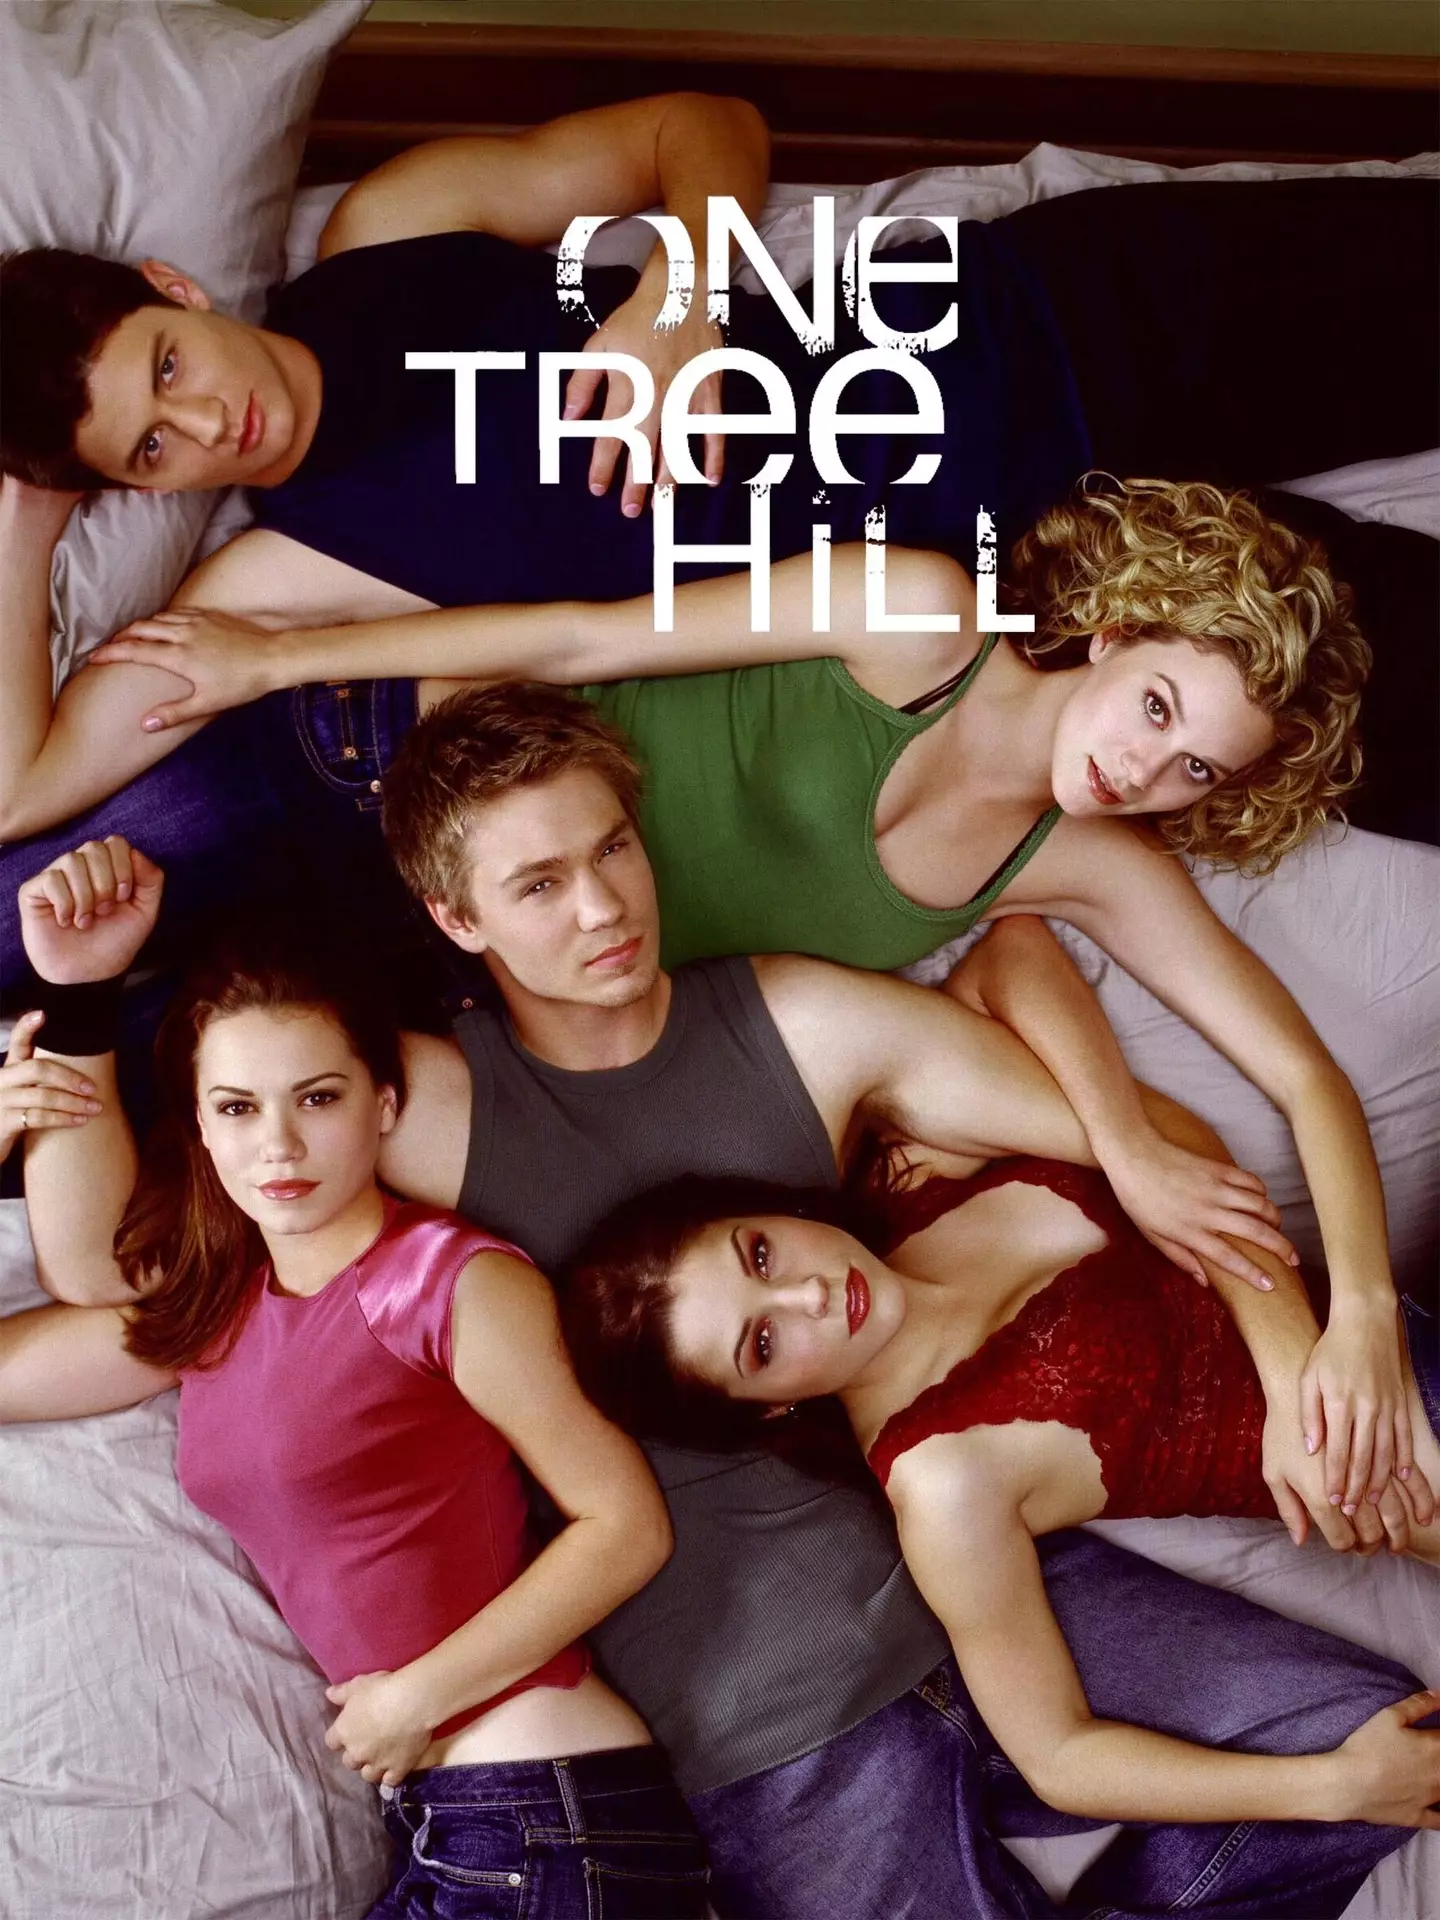 One Tree Hill ran from 2003 to 2012.